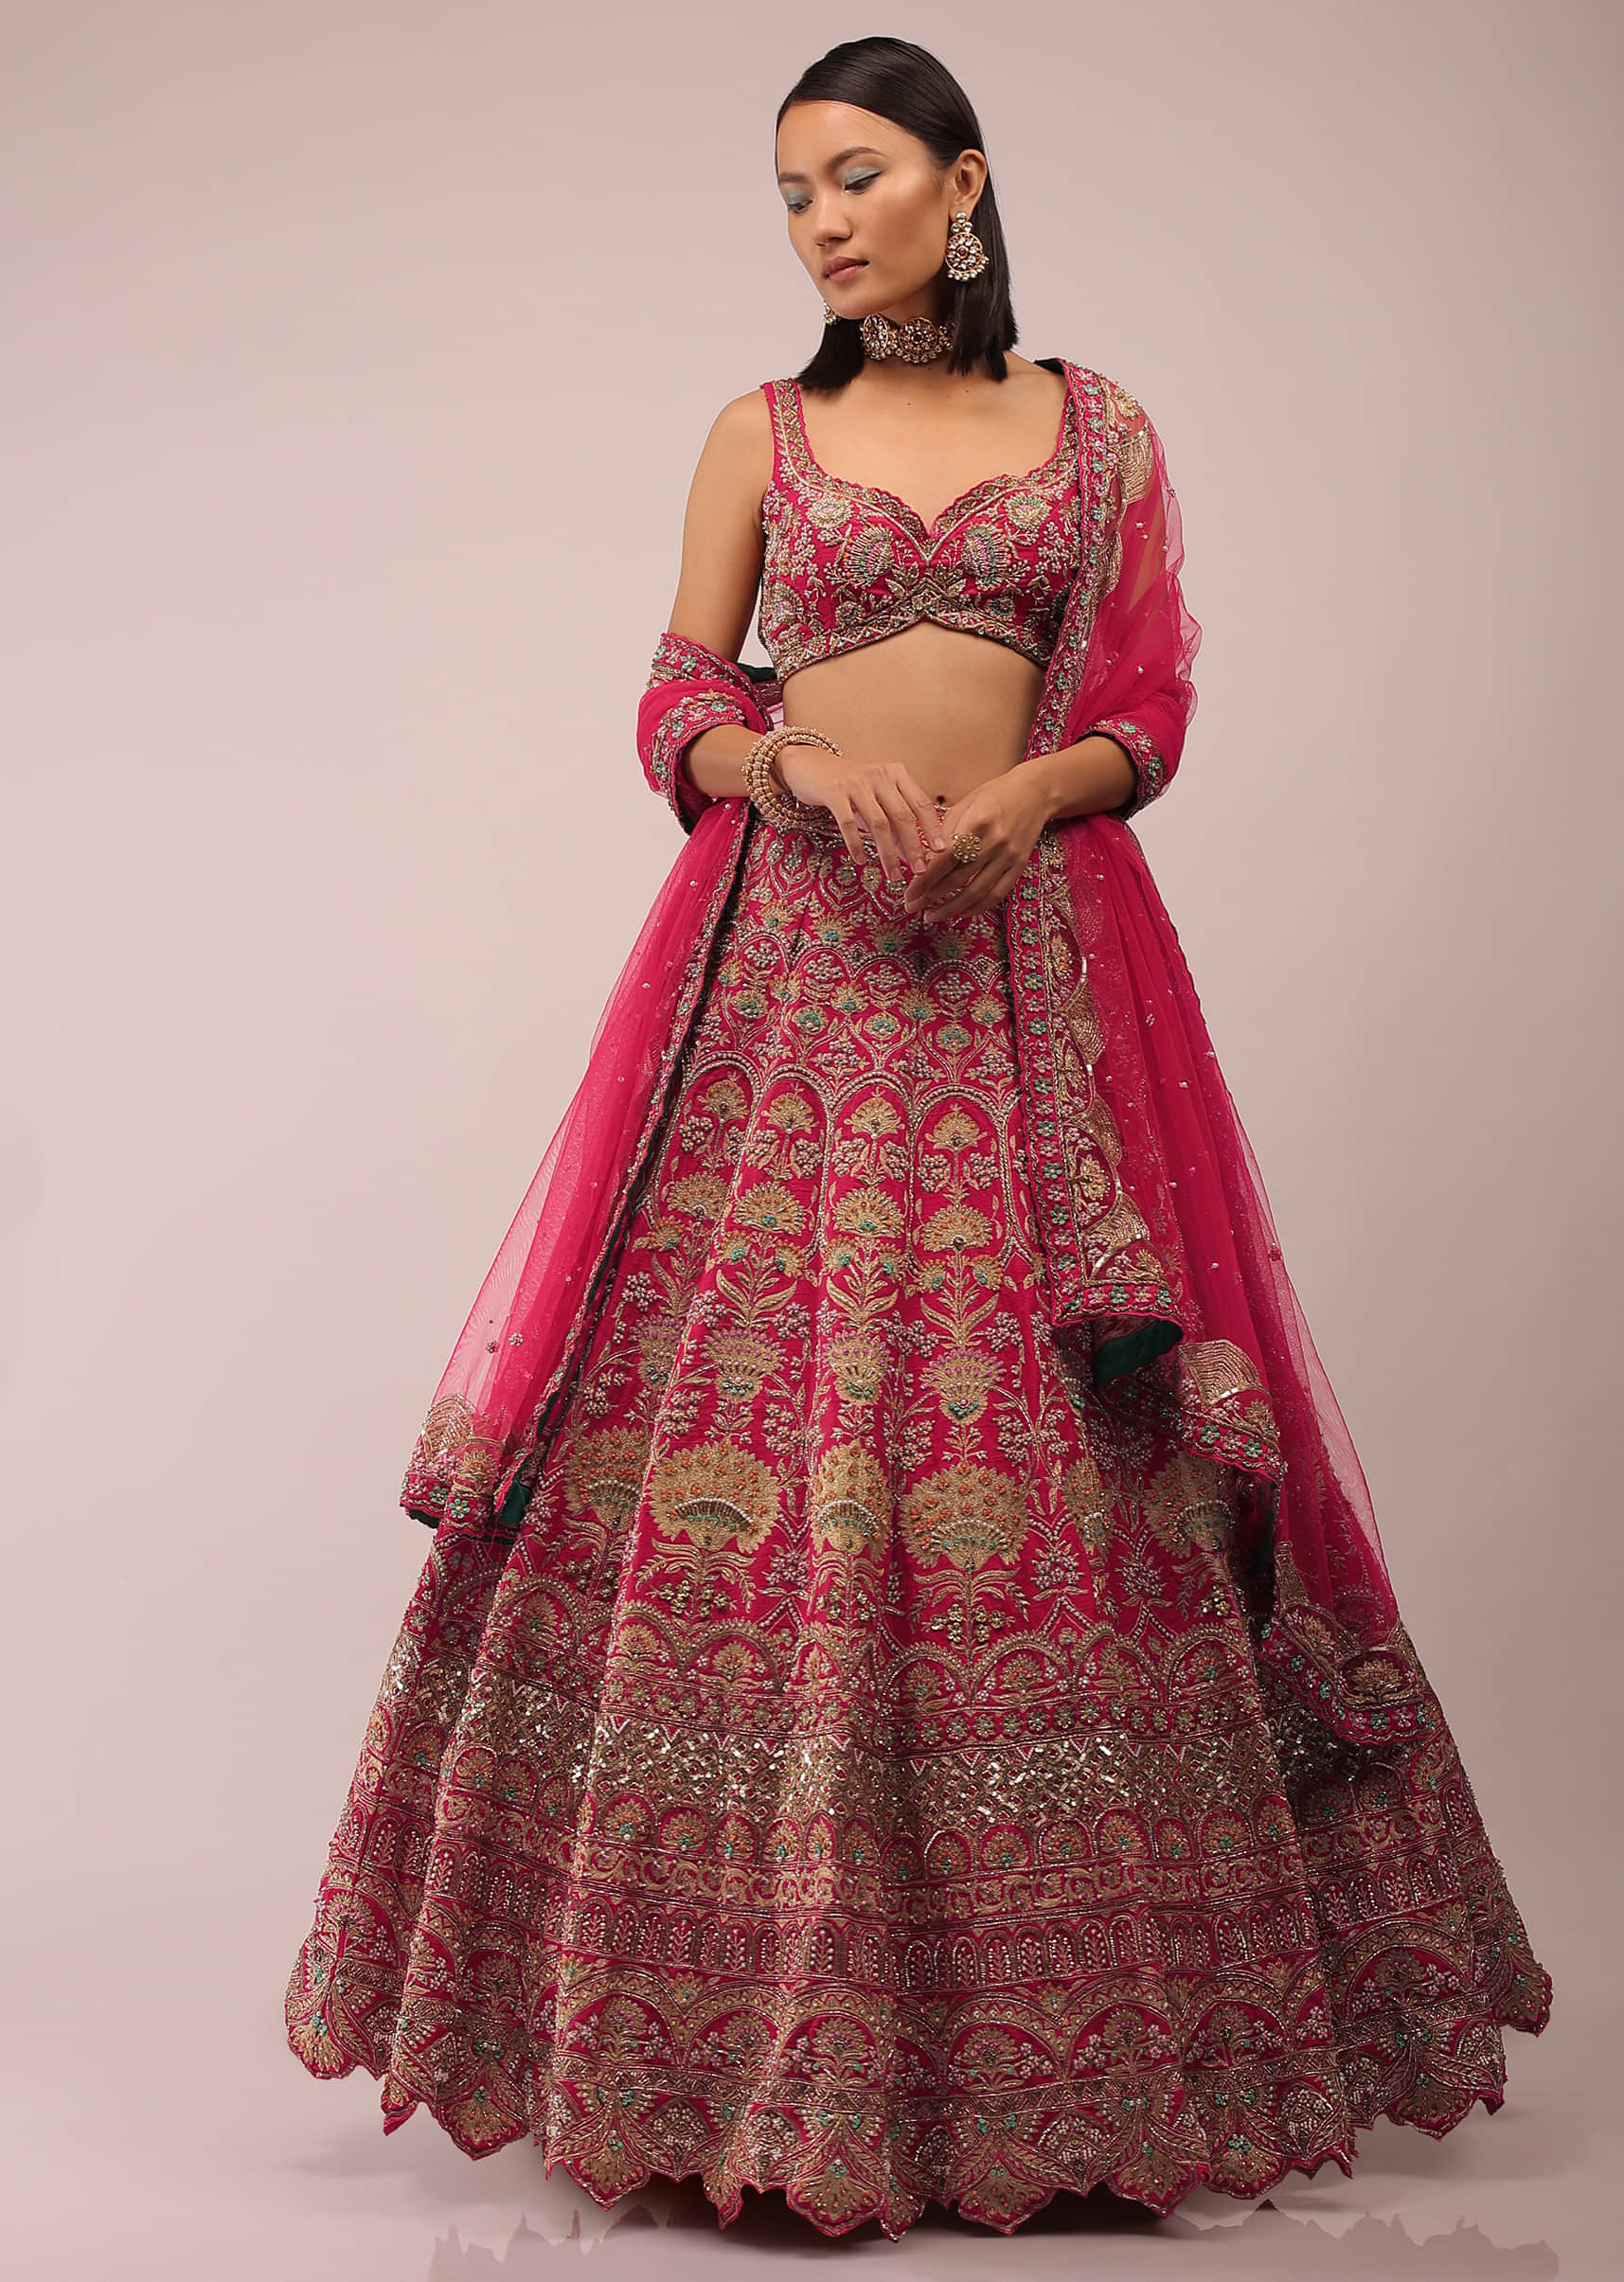 Rani Pink Lehenga In Golden Zari Work Embroidery Inspired By Mughal Architecture With Matching Net Dupatta In Embroidered Buttis